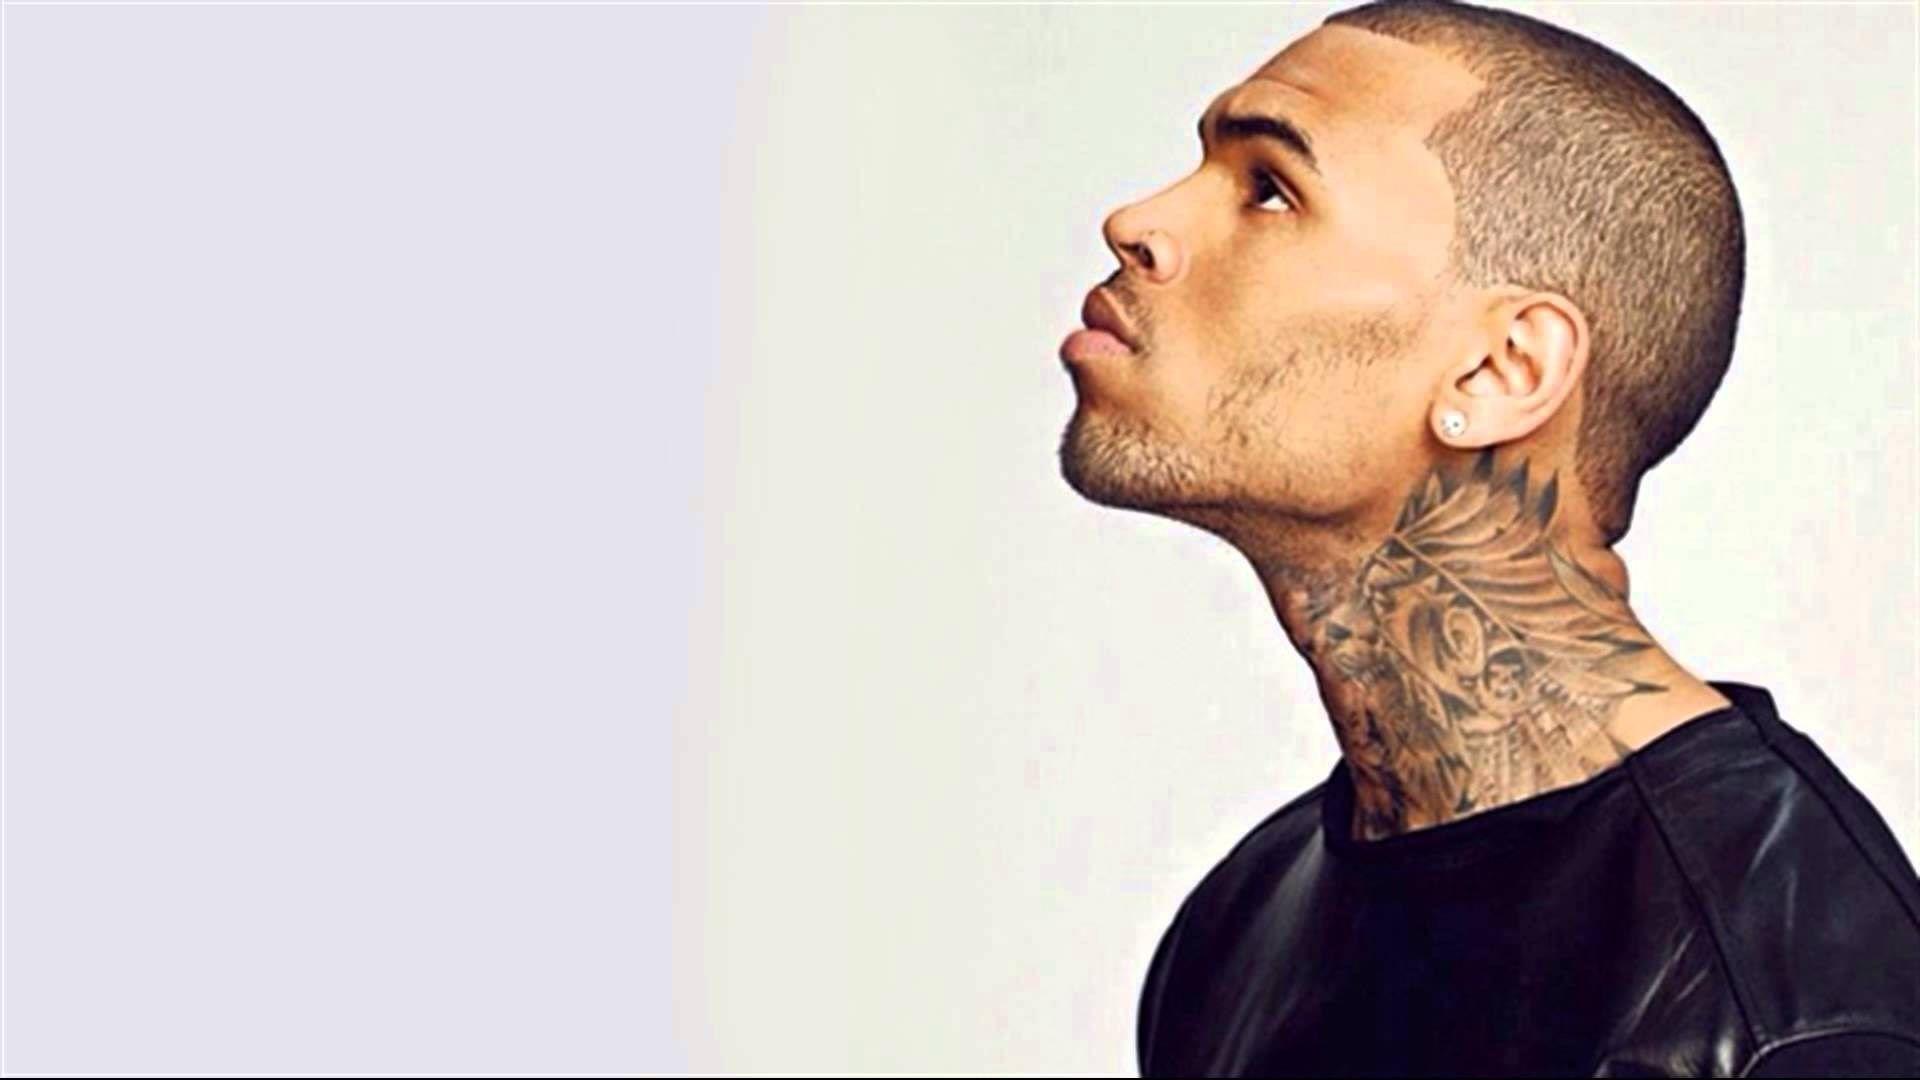 chris brown picture free for desktopx1080 kB